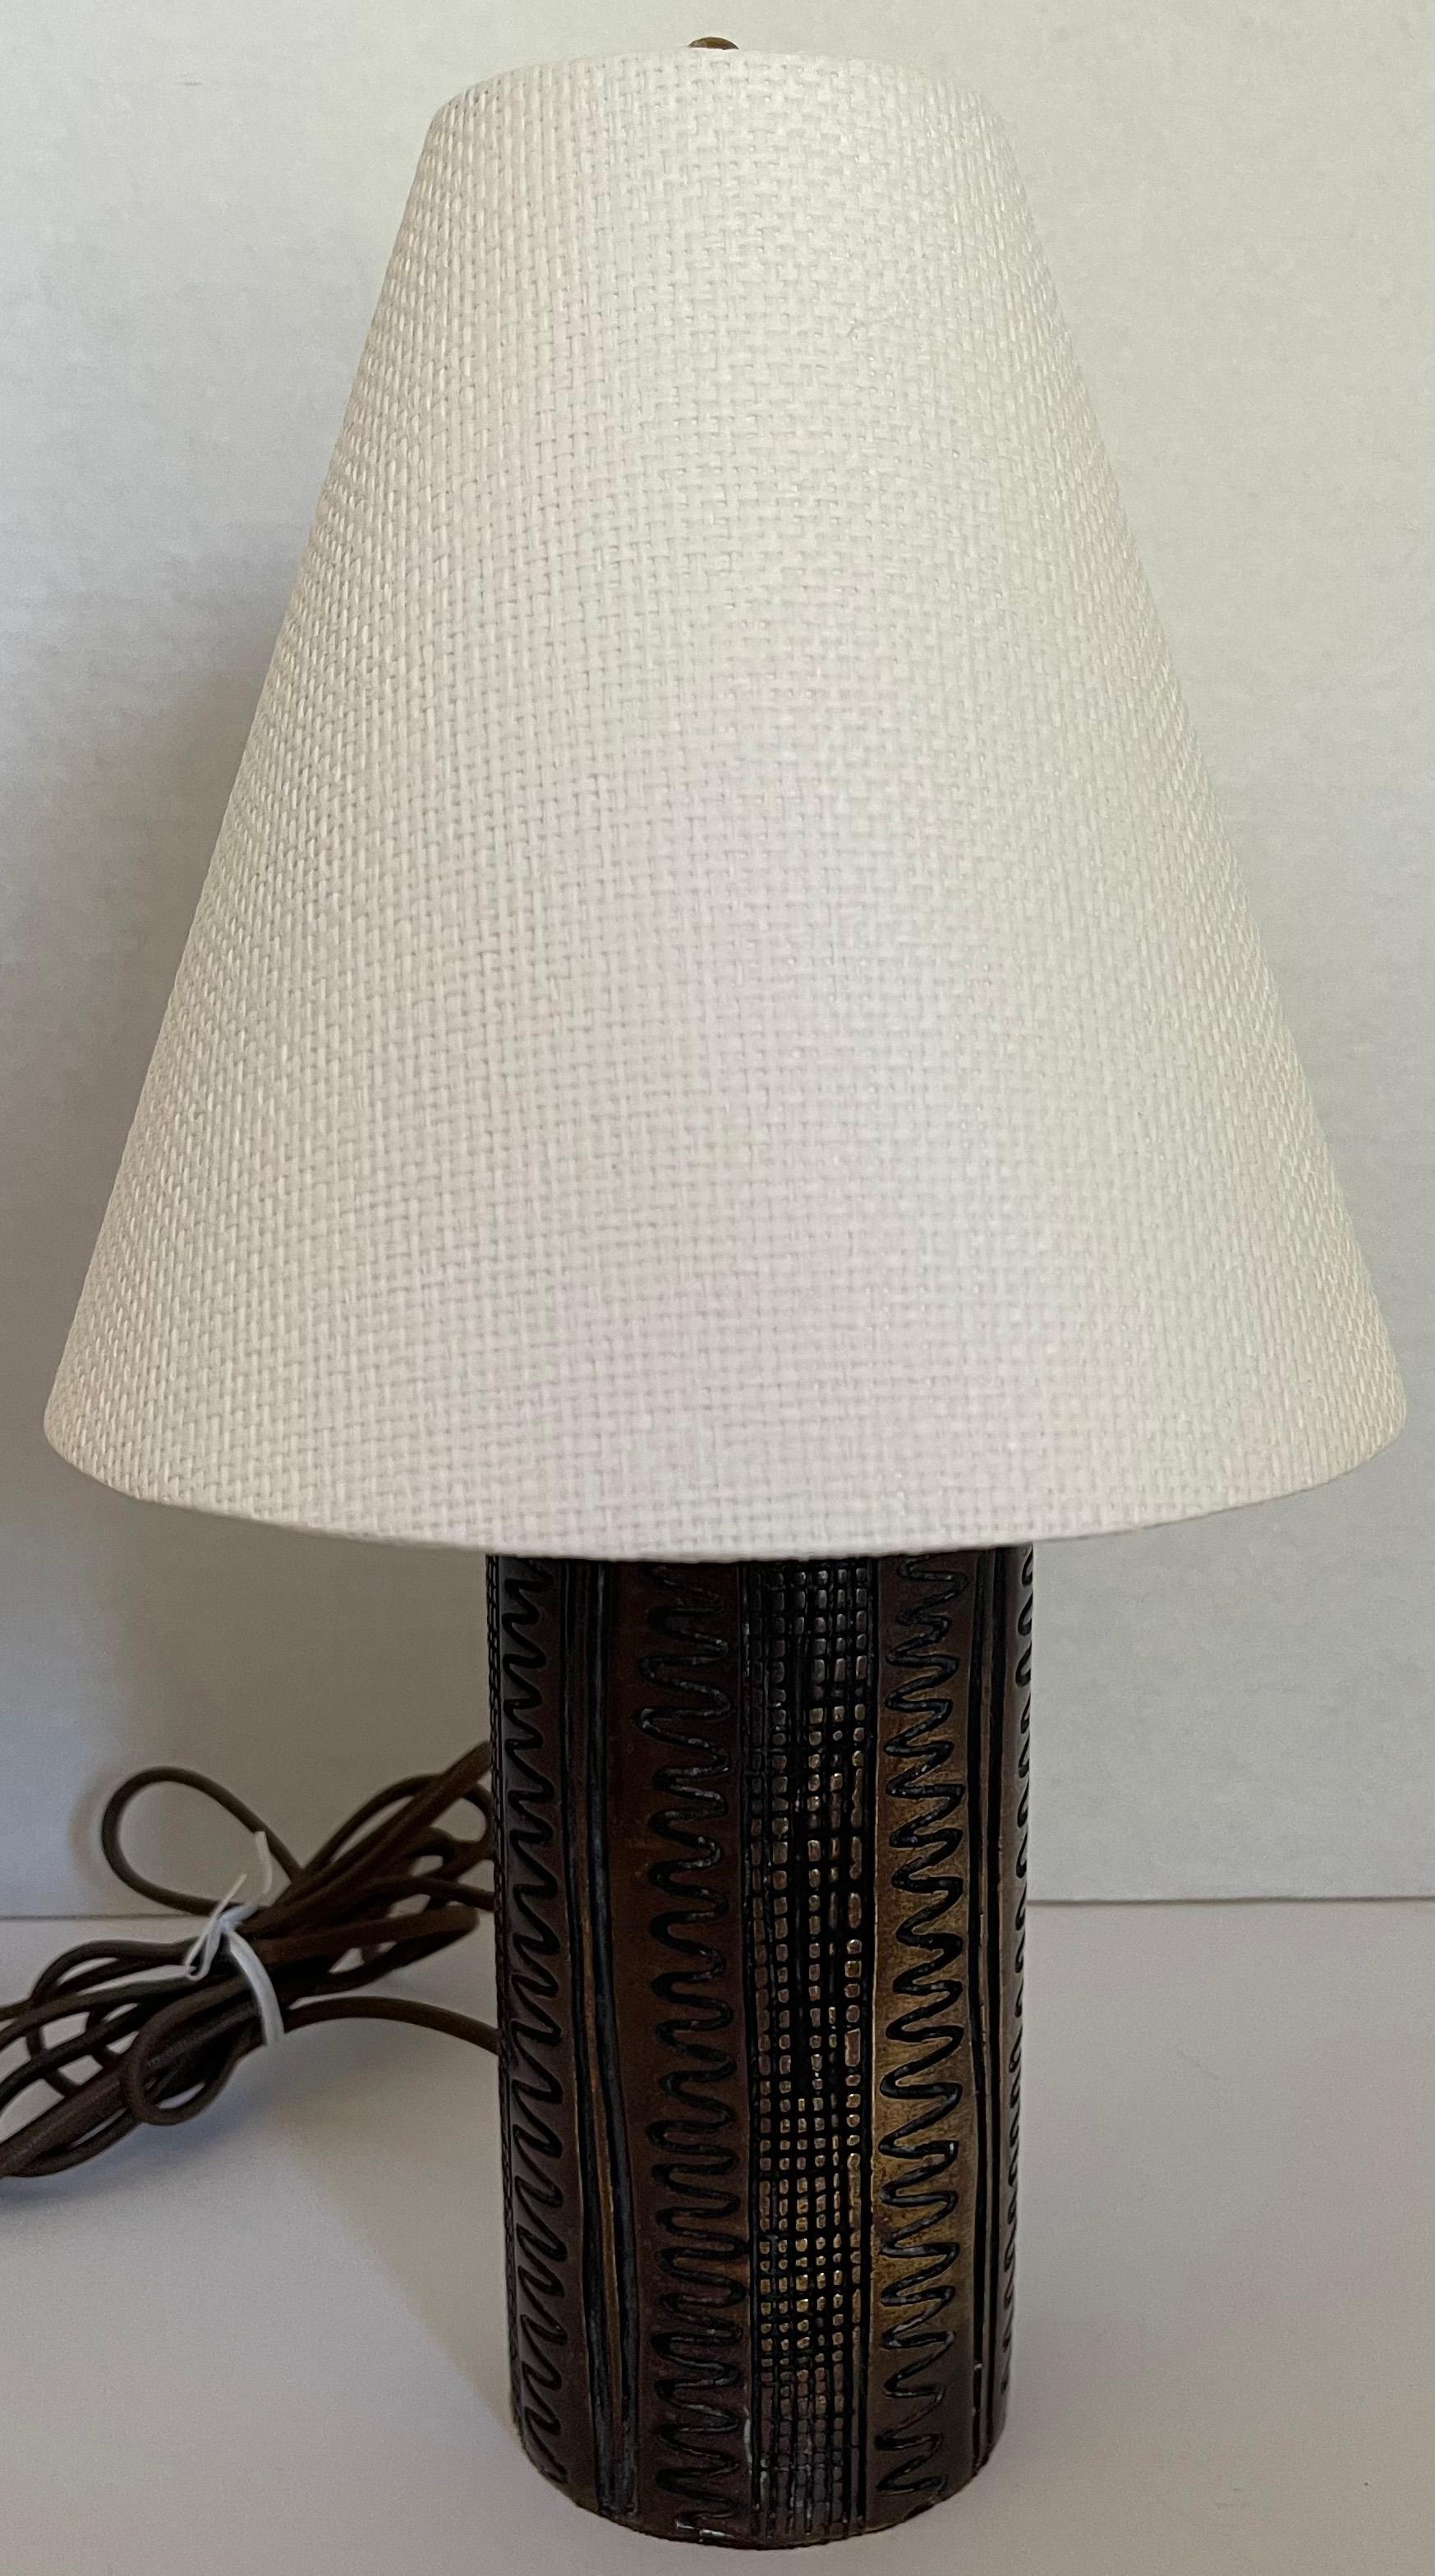 1970s burnished brass petite table lamp. All over carved geometric design. Newly rewired with new brass socket. Lamp takes one standard bulb (not included). Custom white Phillip Jeffries grasscloth lampshade by Illume NYC is included. Bulb clip and